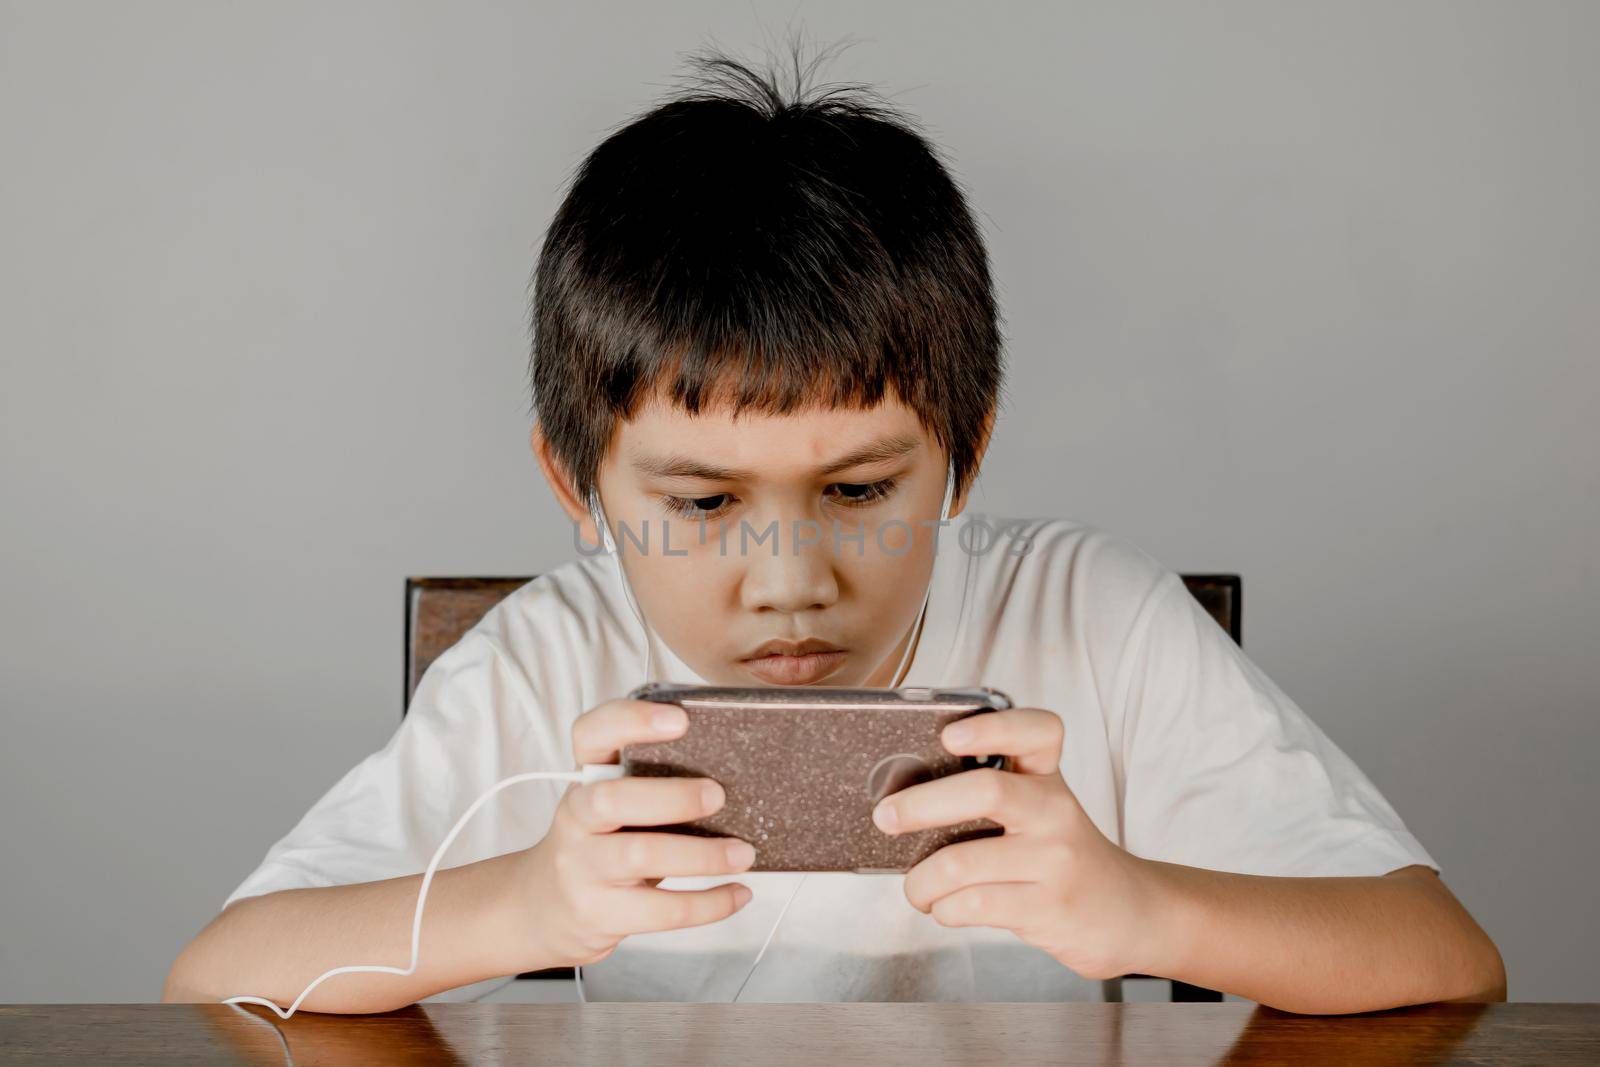 Closeup of a boy's face wearing headphones and intending to play games on his smartphone.